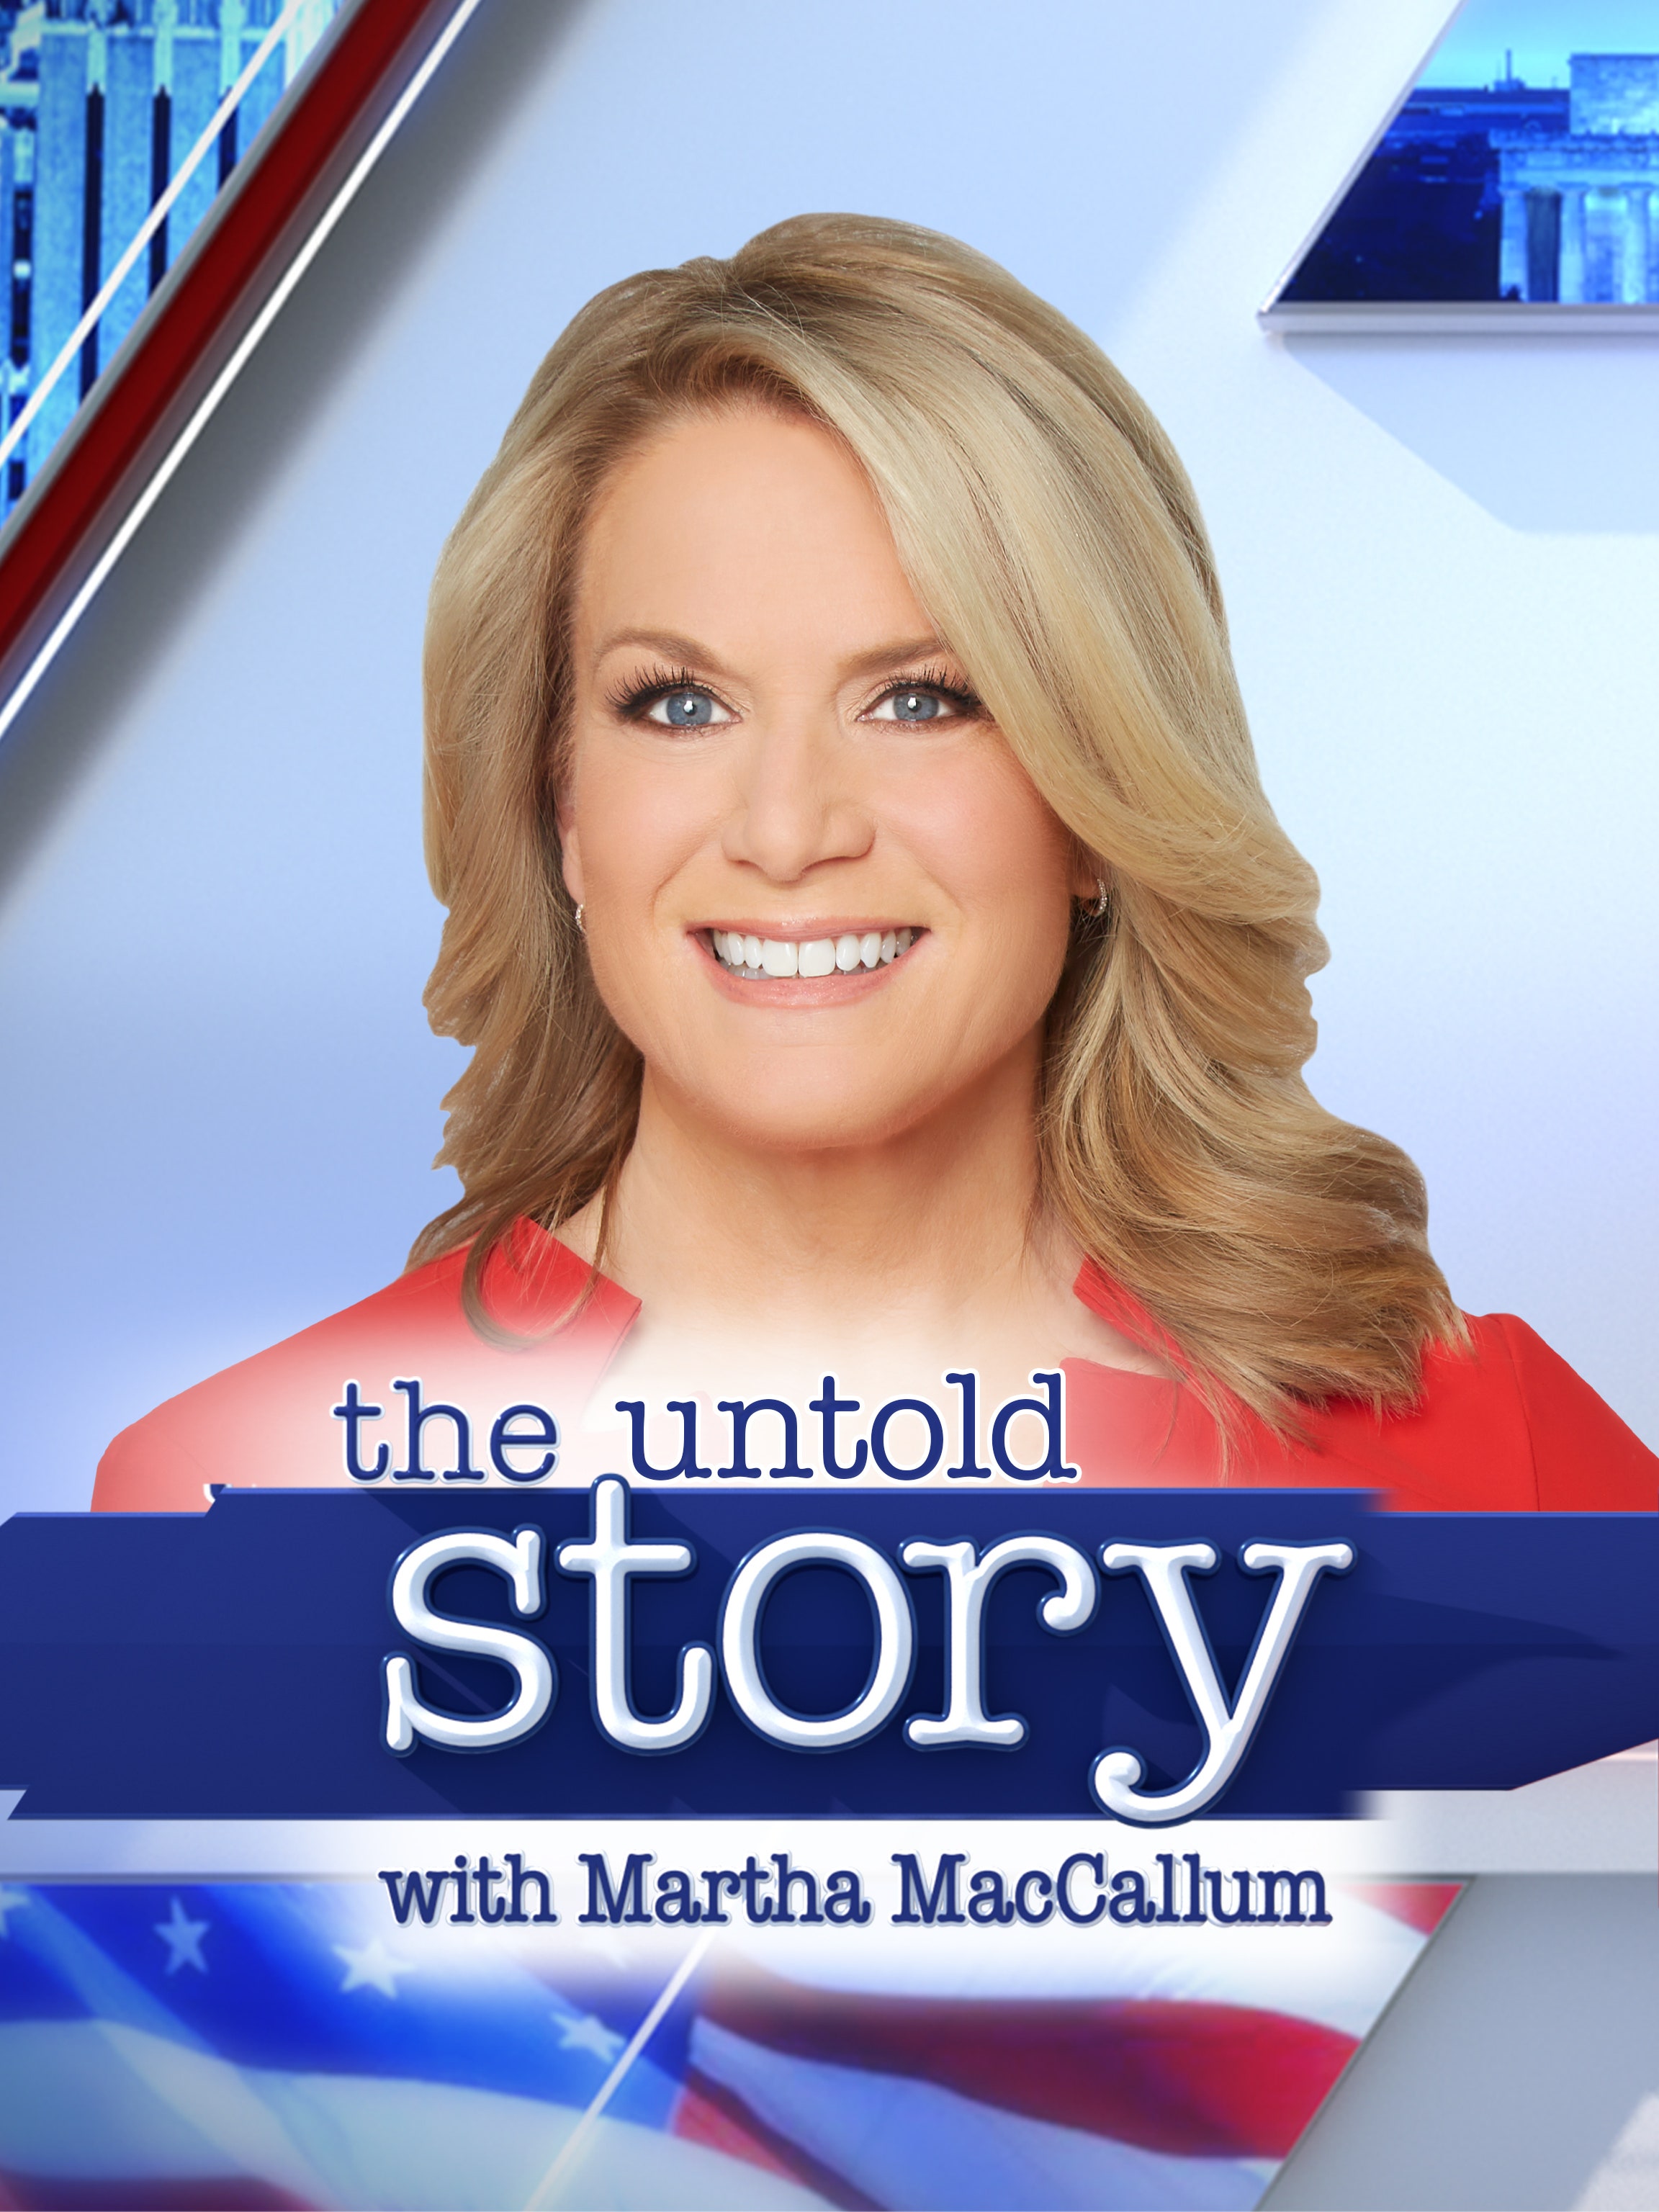 The Untold Story with Martha MacCallum dcg-mark-poster